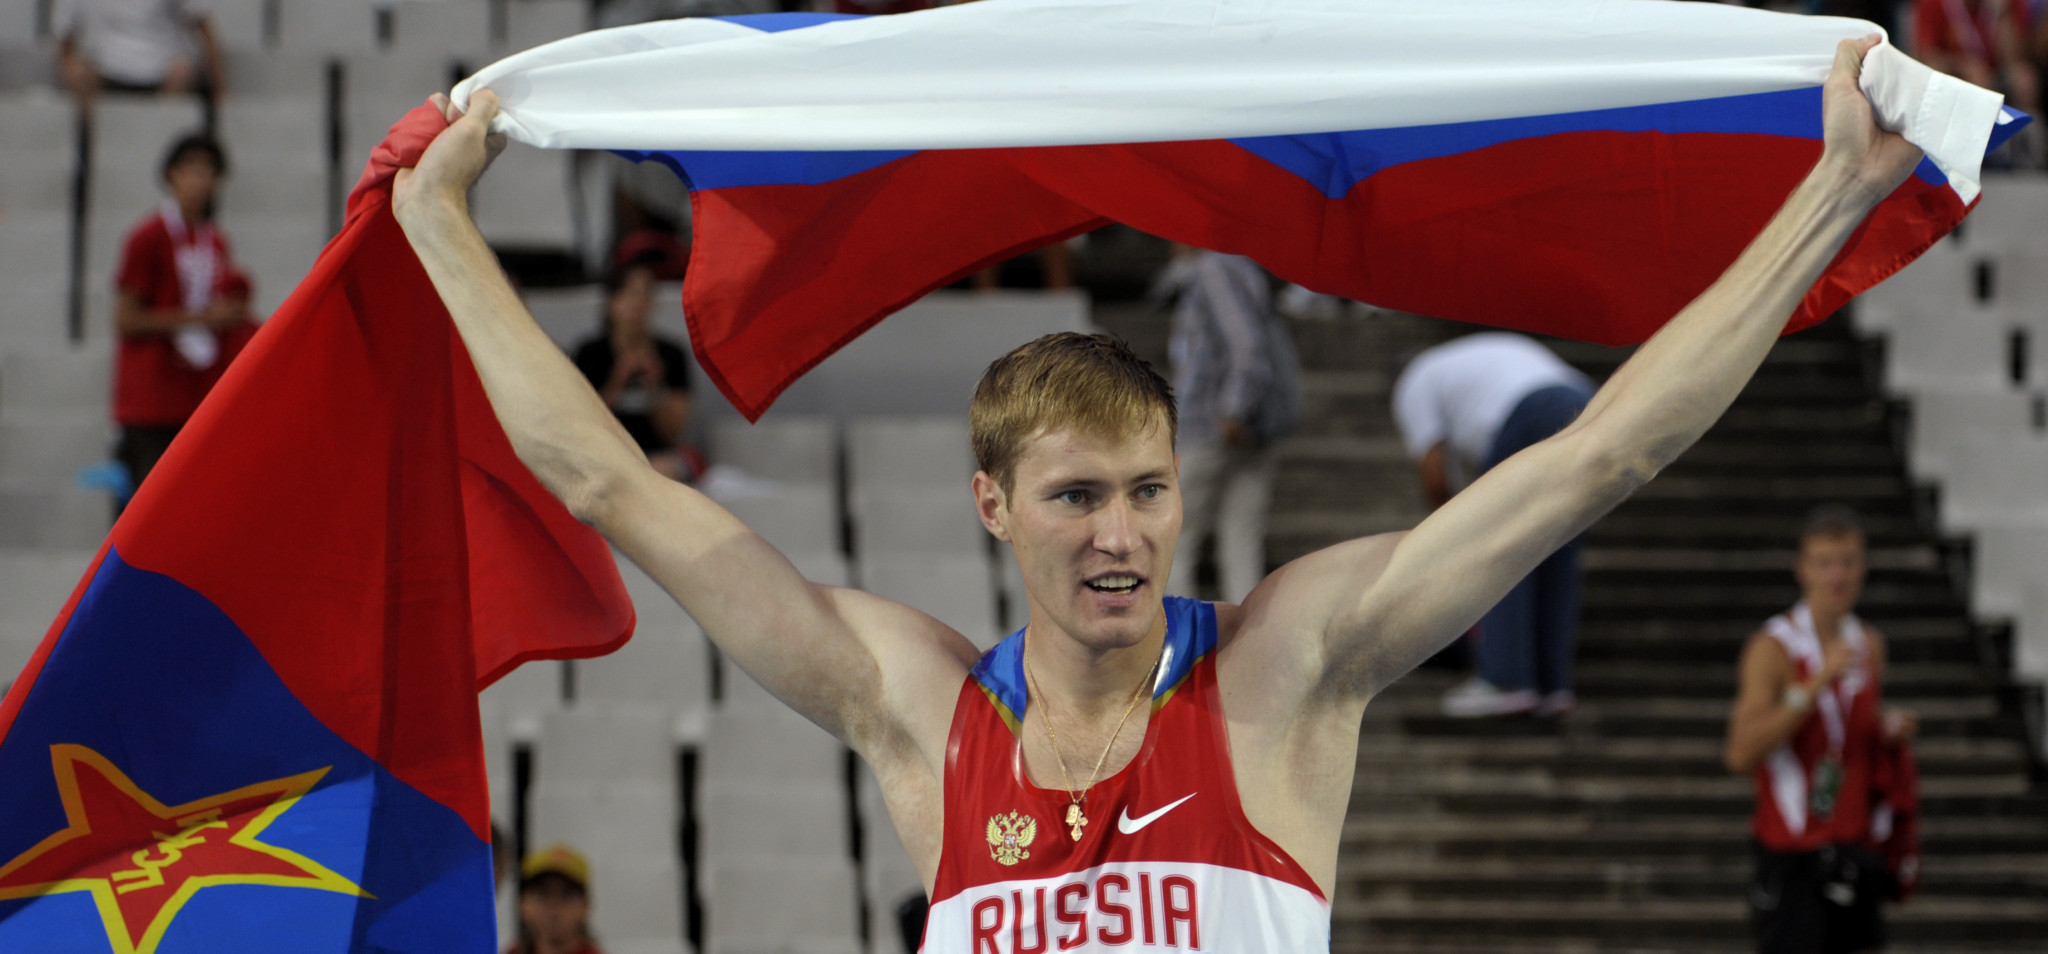 Russian high jumper appeals against CAS decision to uphold four-year ban